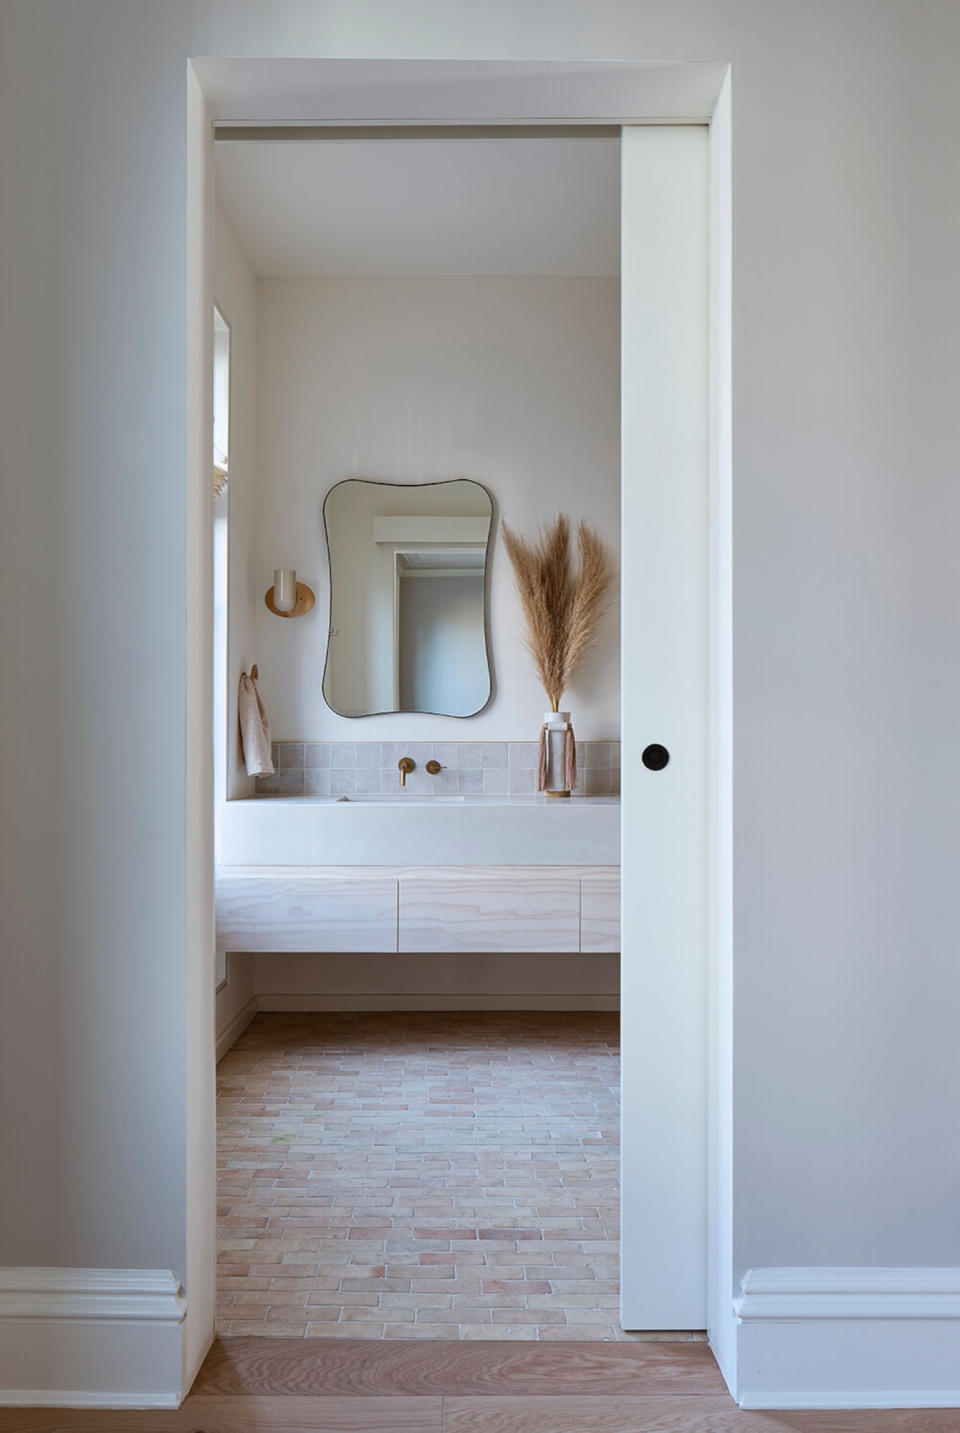 Through a pocket door, view a bathroom with warm white walls, a wall-mounted vanity, and a pale brick floor.